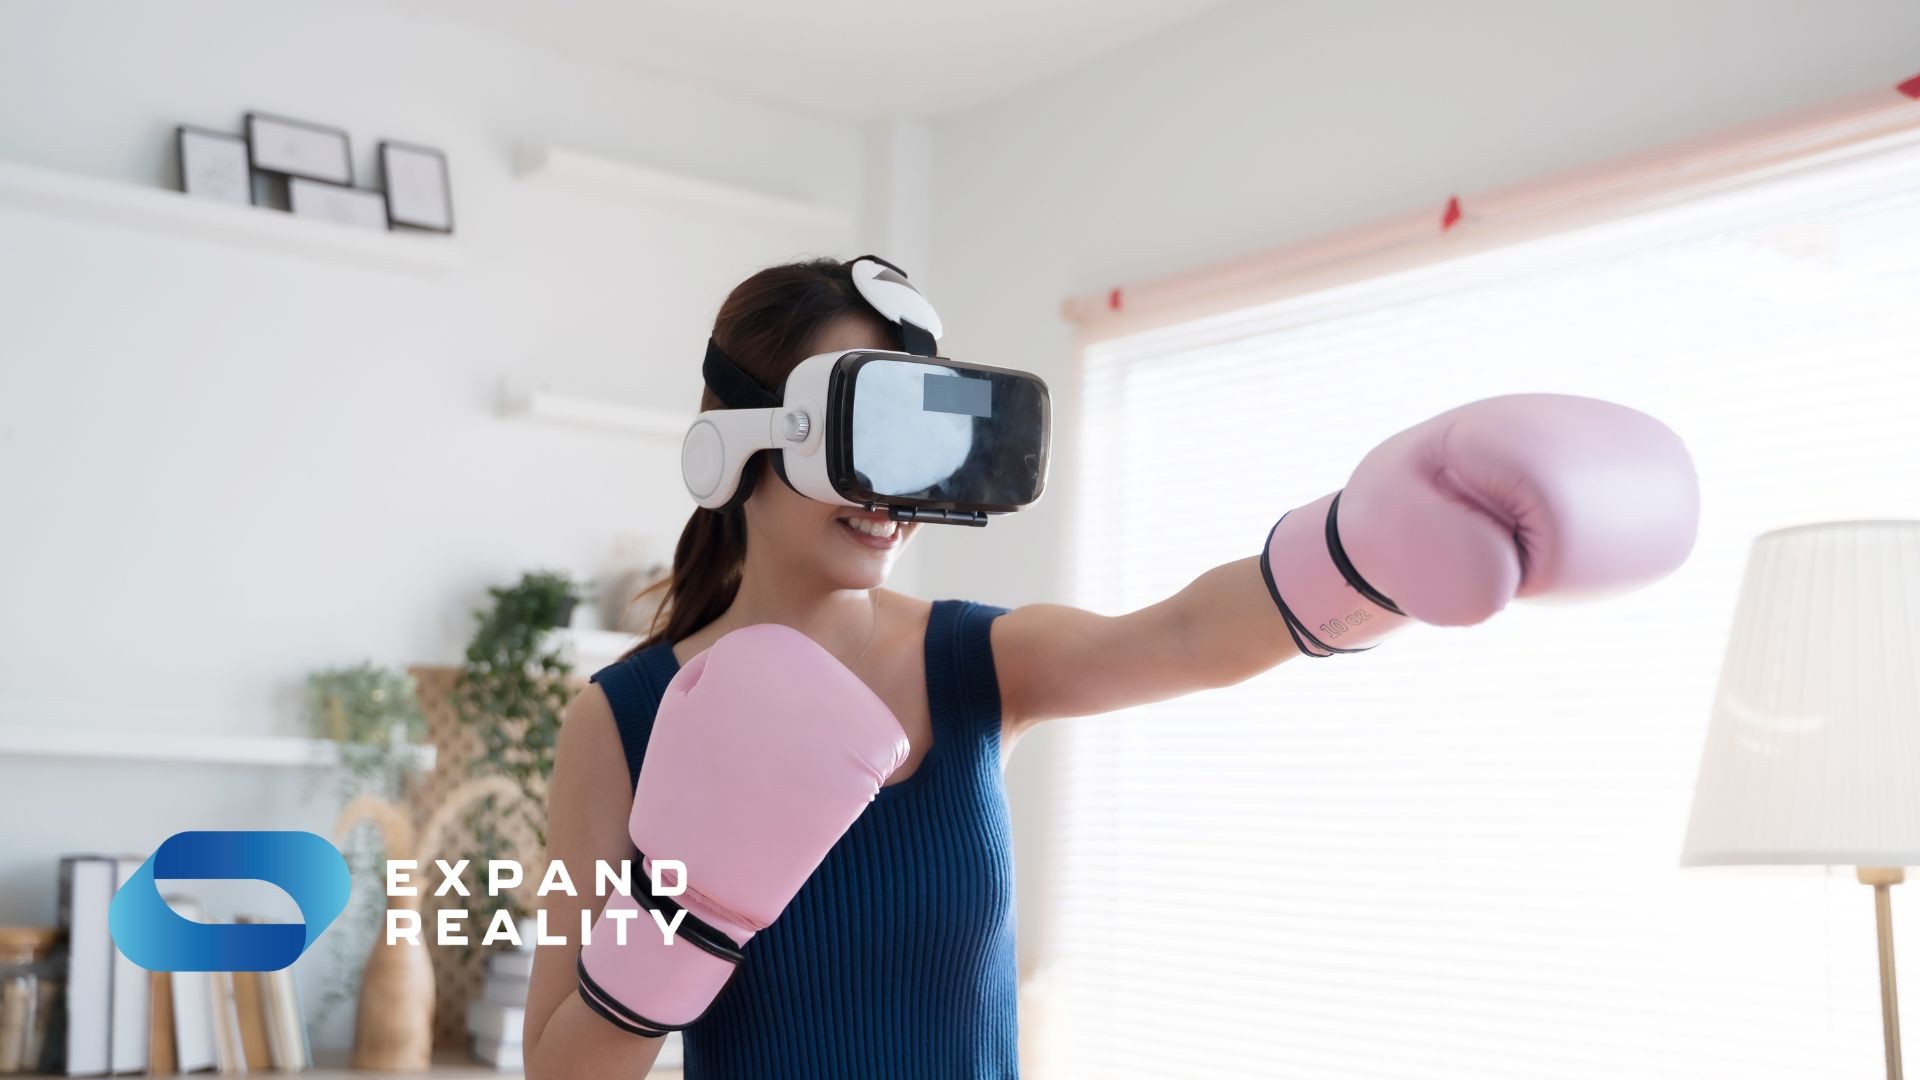 Discover how XR Fitness is revolutionising workouts at home with immersive technology. From VR games to AR apps, there's something for everyone.